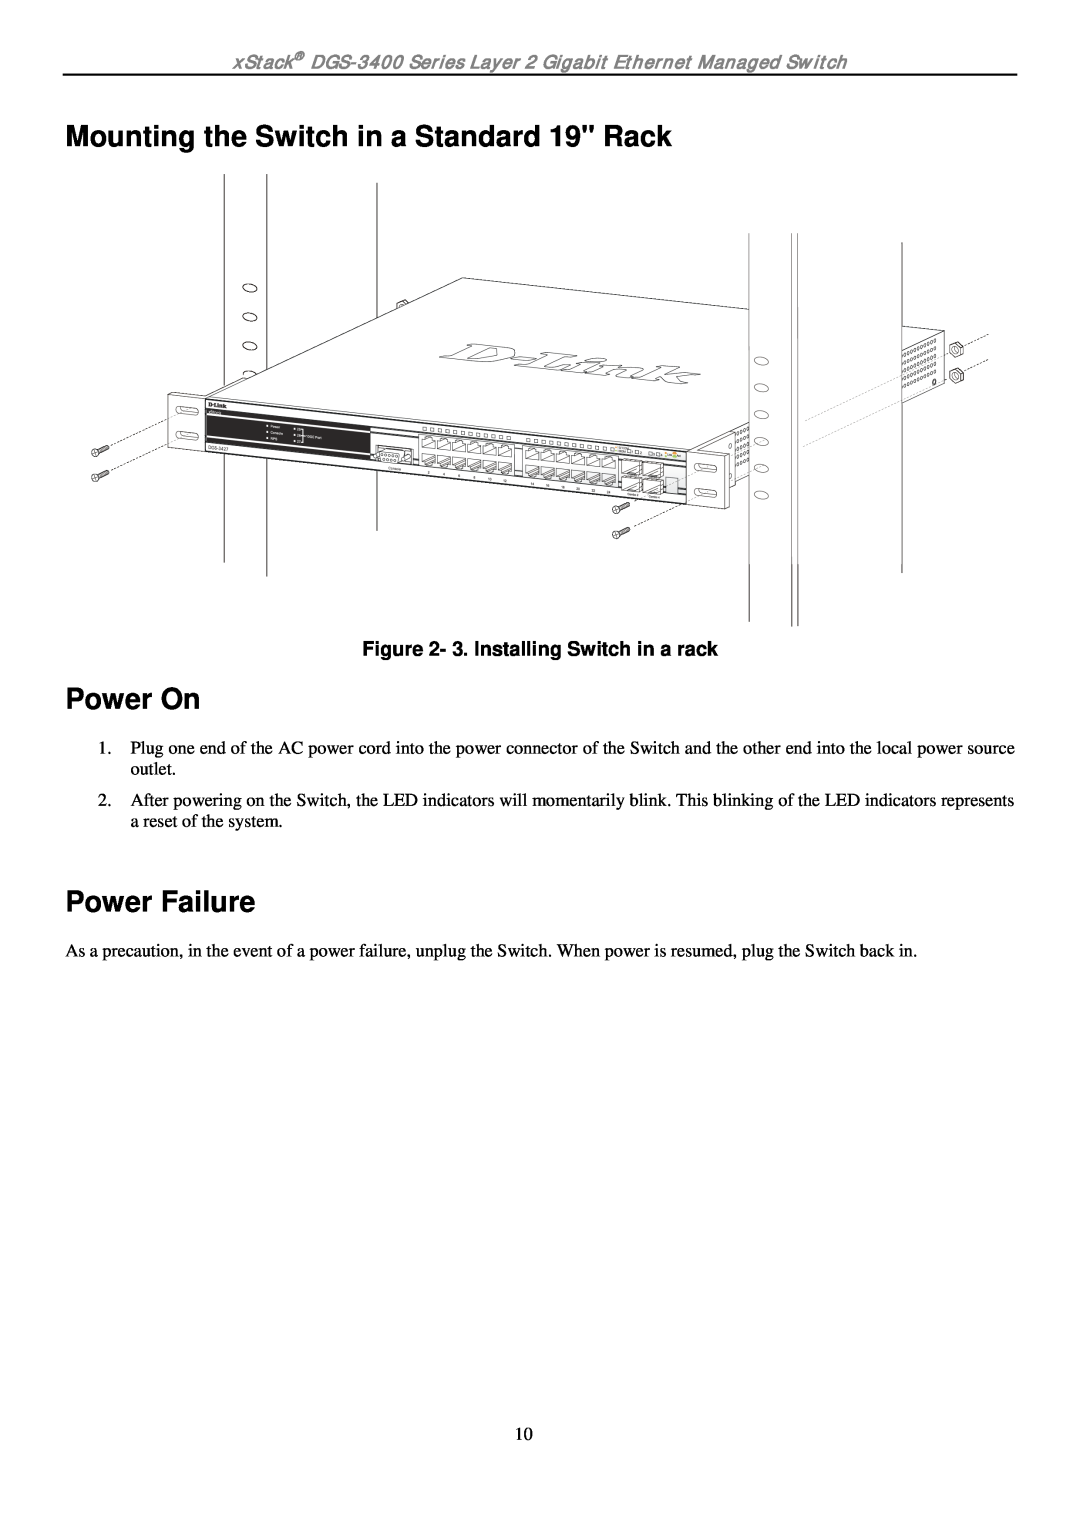 D-Link ethernet managed switch manual Mounting the Switch in a Standard 19 Rack, Power On, Power Failure 